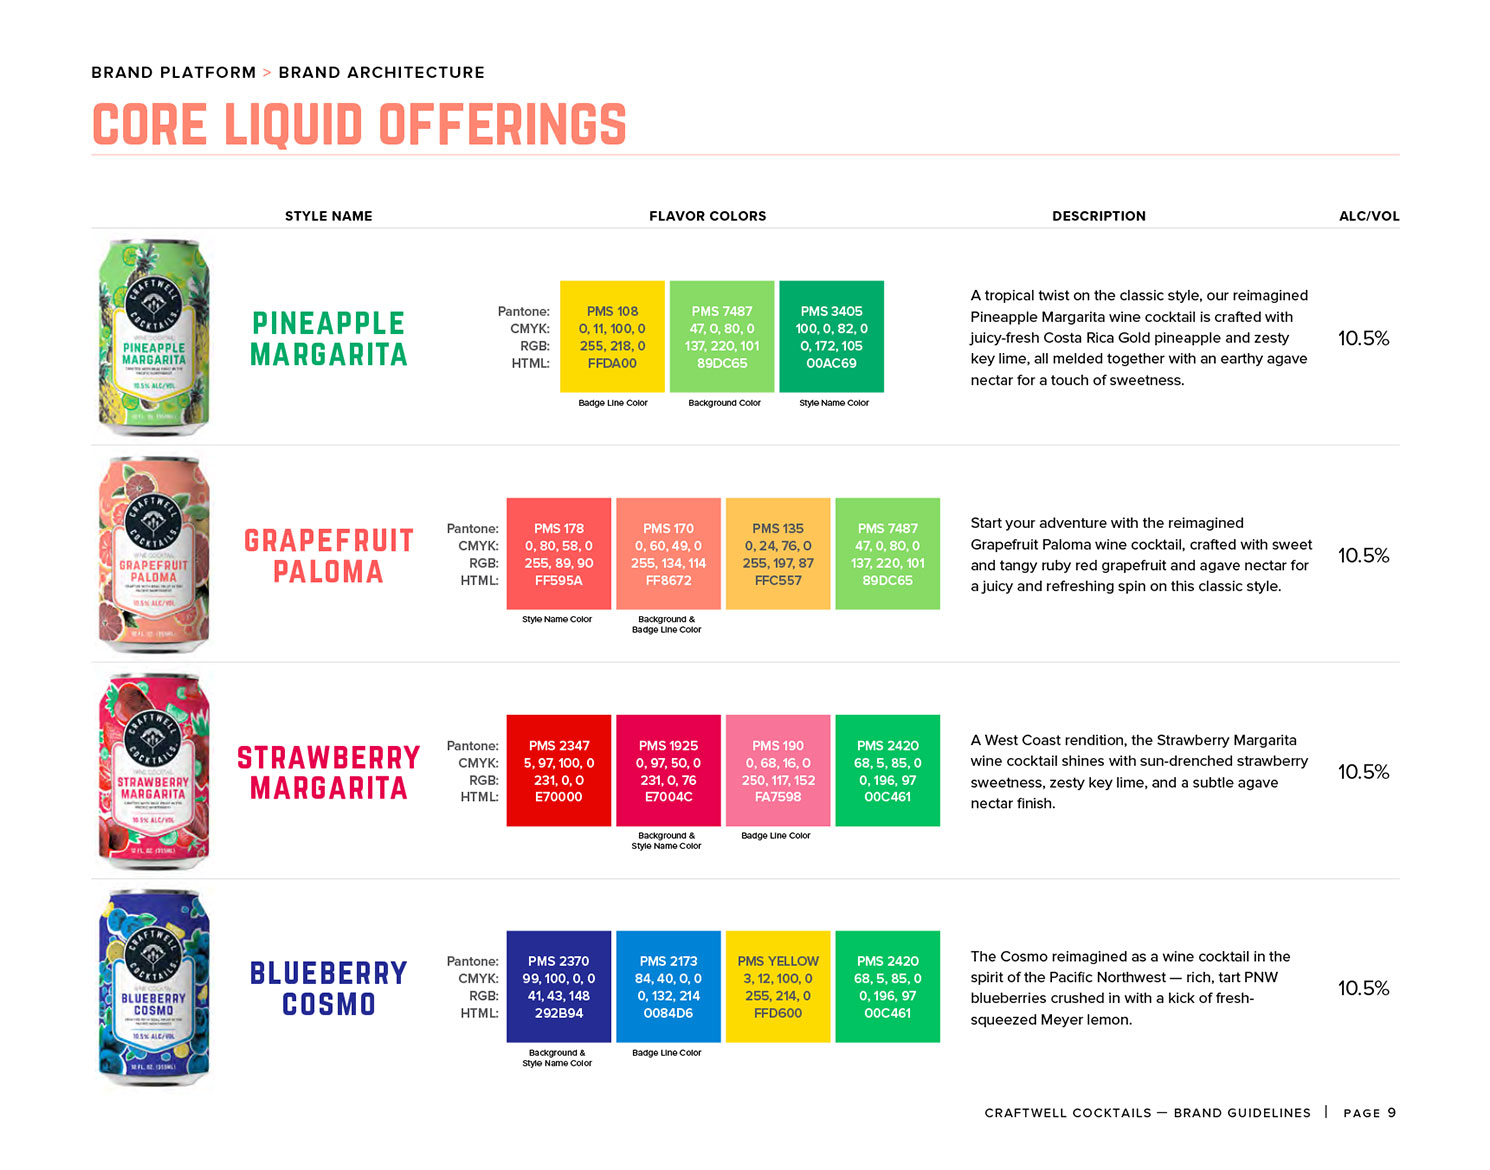 Craftwell Cocktails brand guidelines liquid offerings page